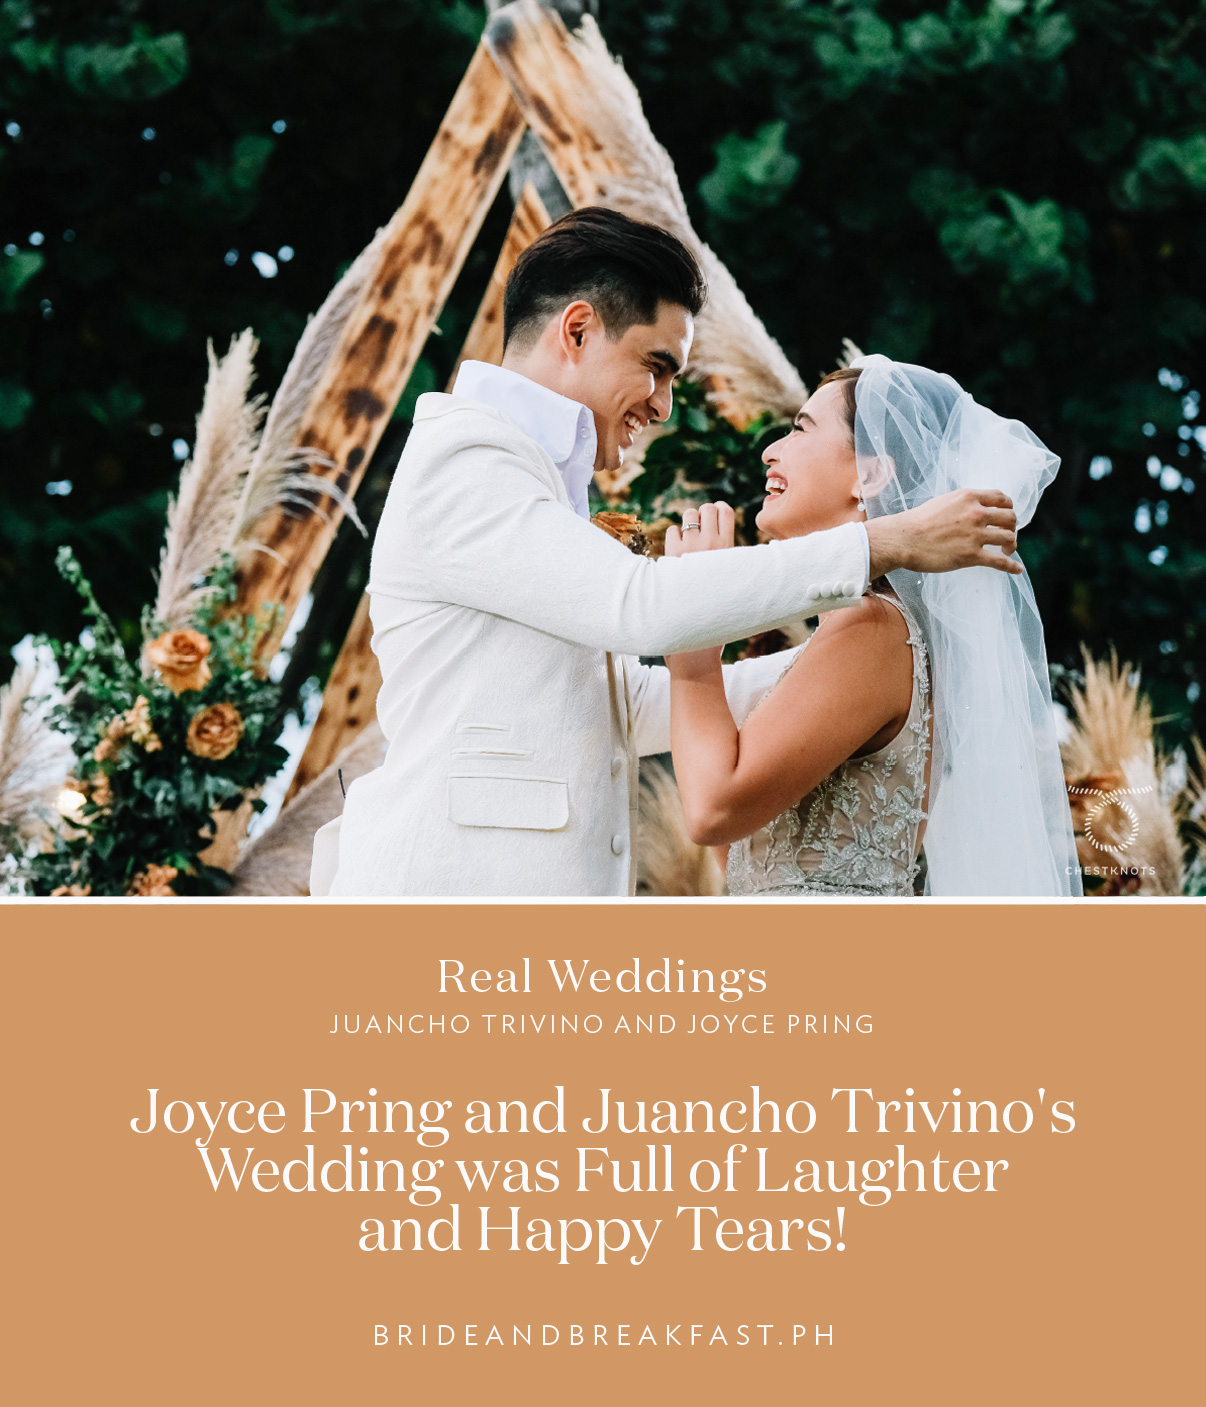 Joyce Pring and Juancho Trivino’s Wedding was Full of Laughter and Happy Tears!